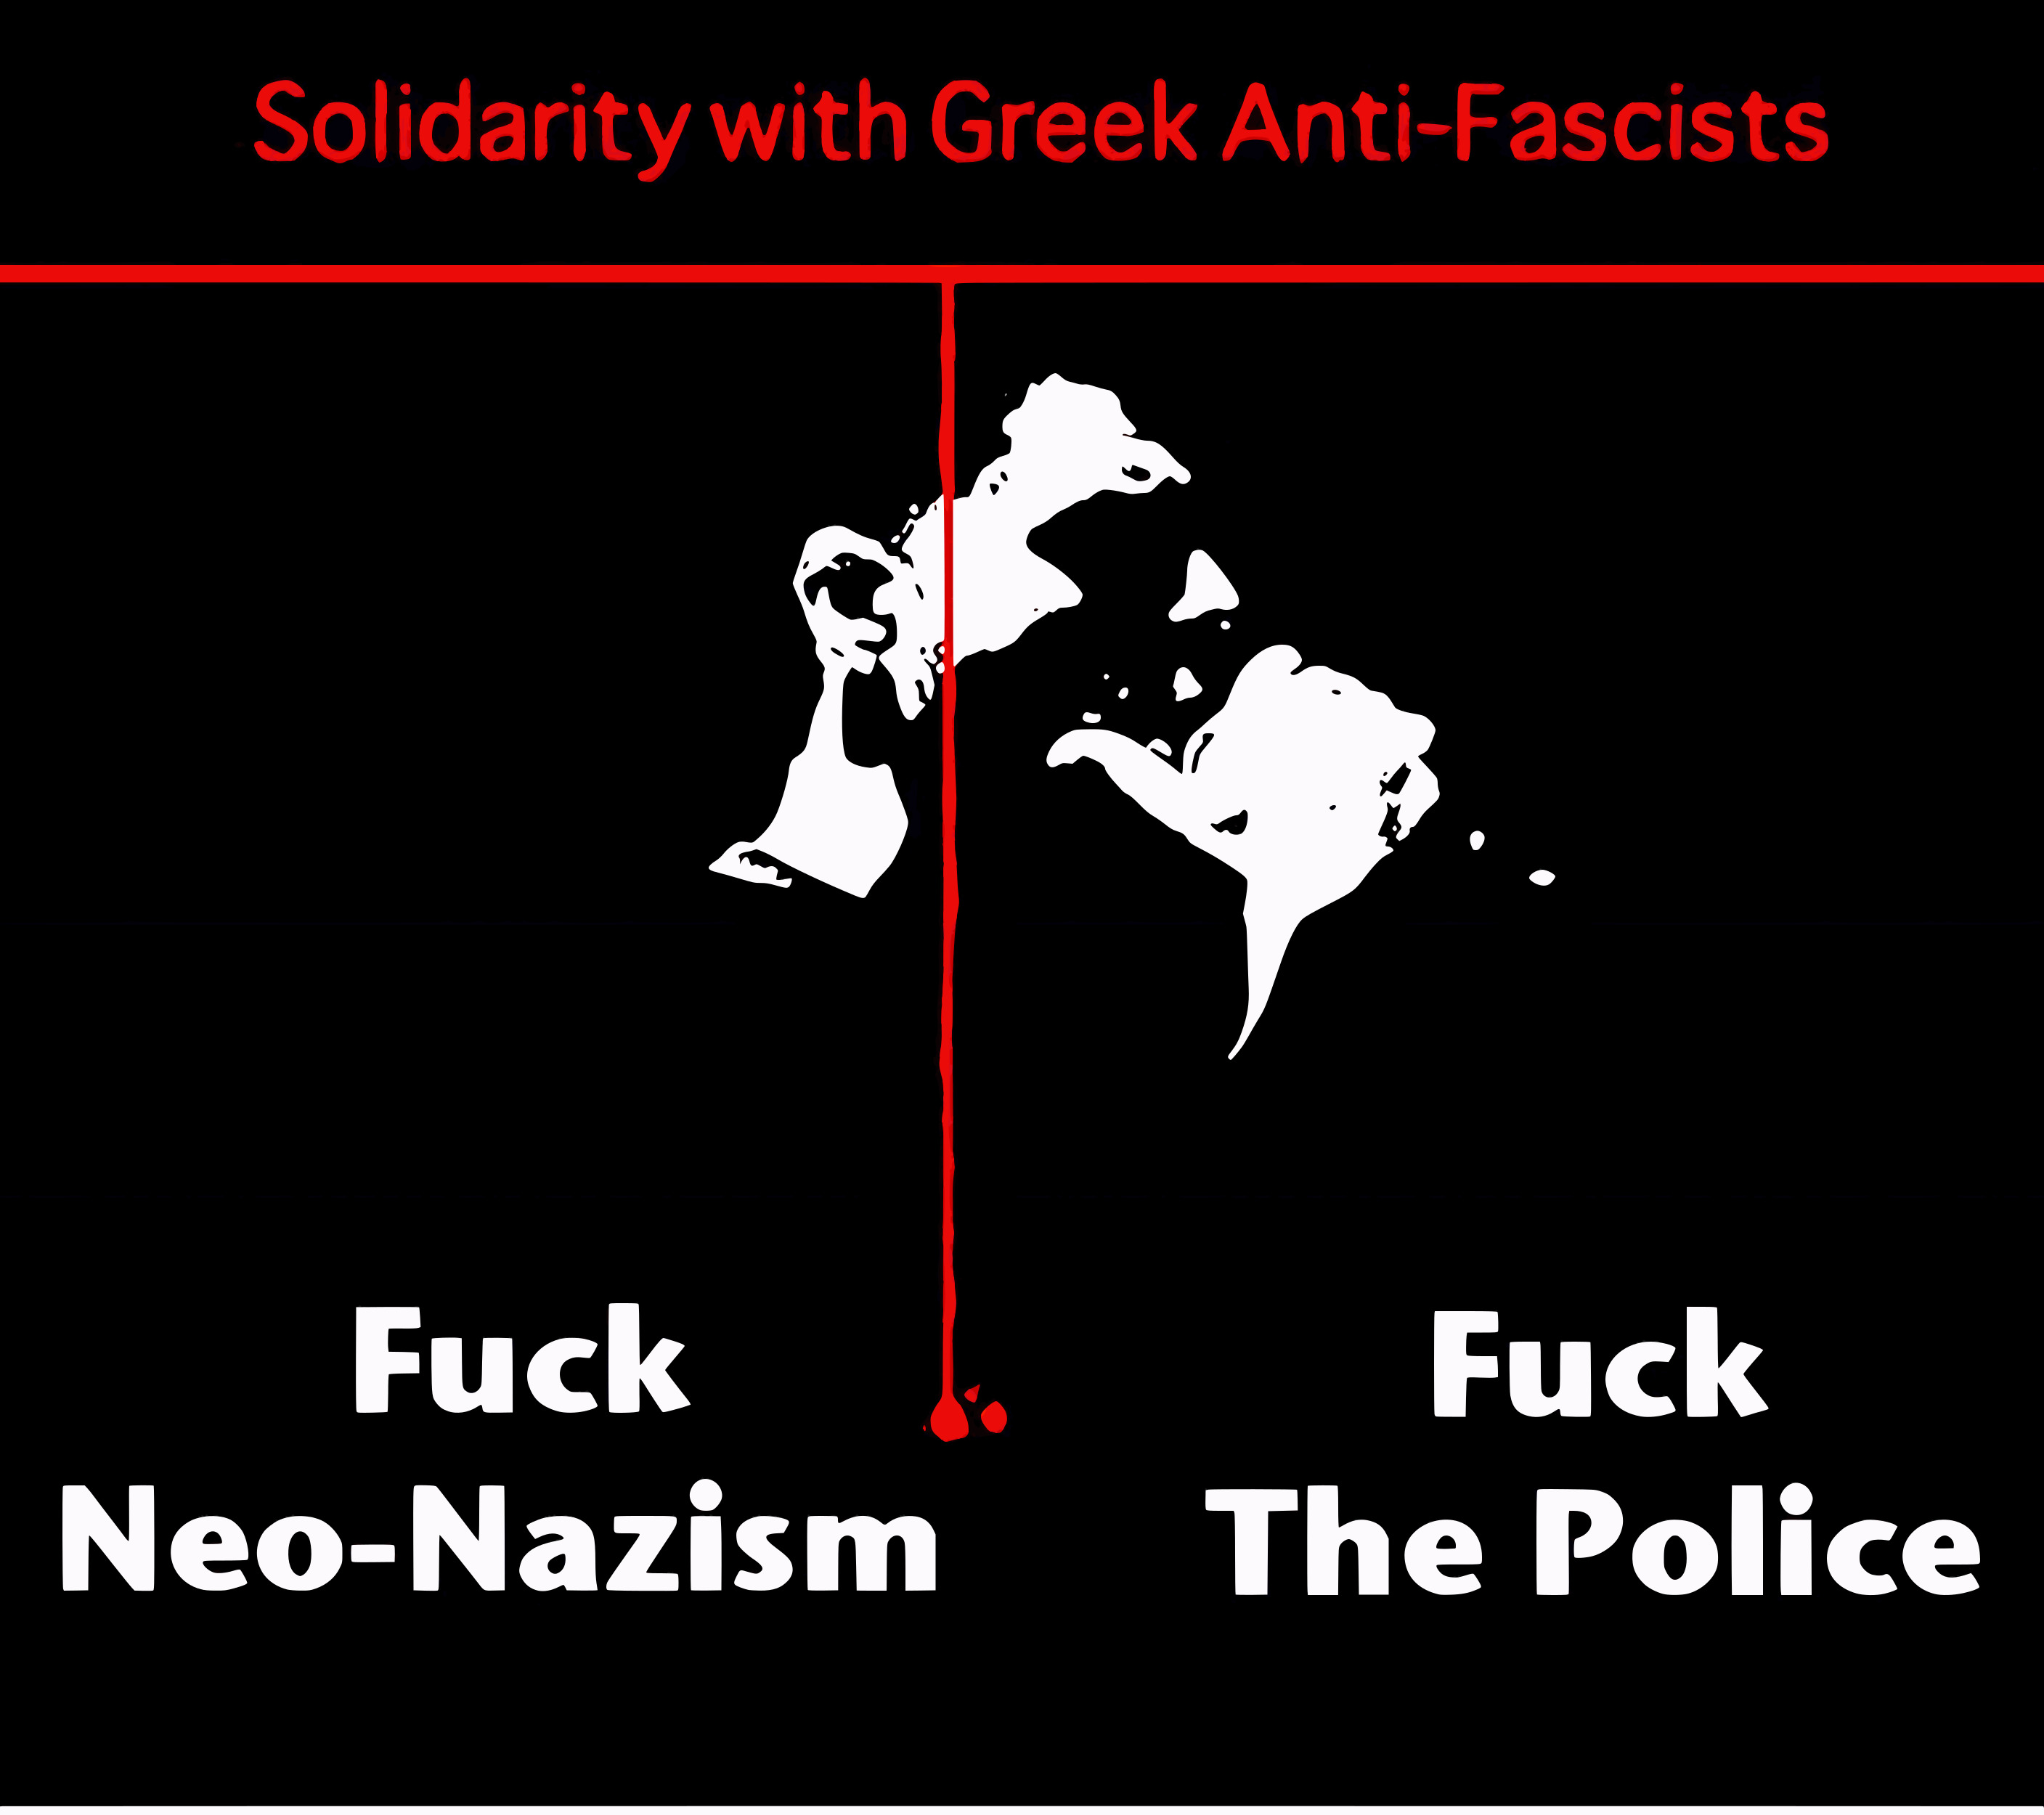 Solidarity with Greek anti-fascists, fuck neo-nazism, fuck the police